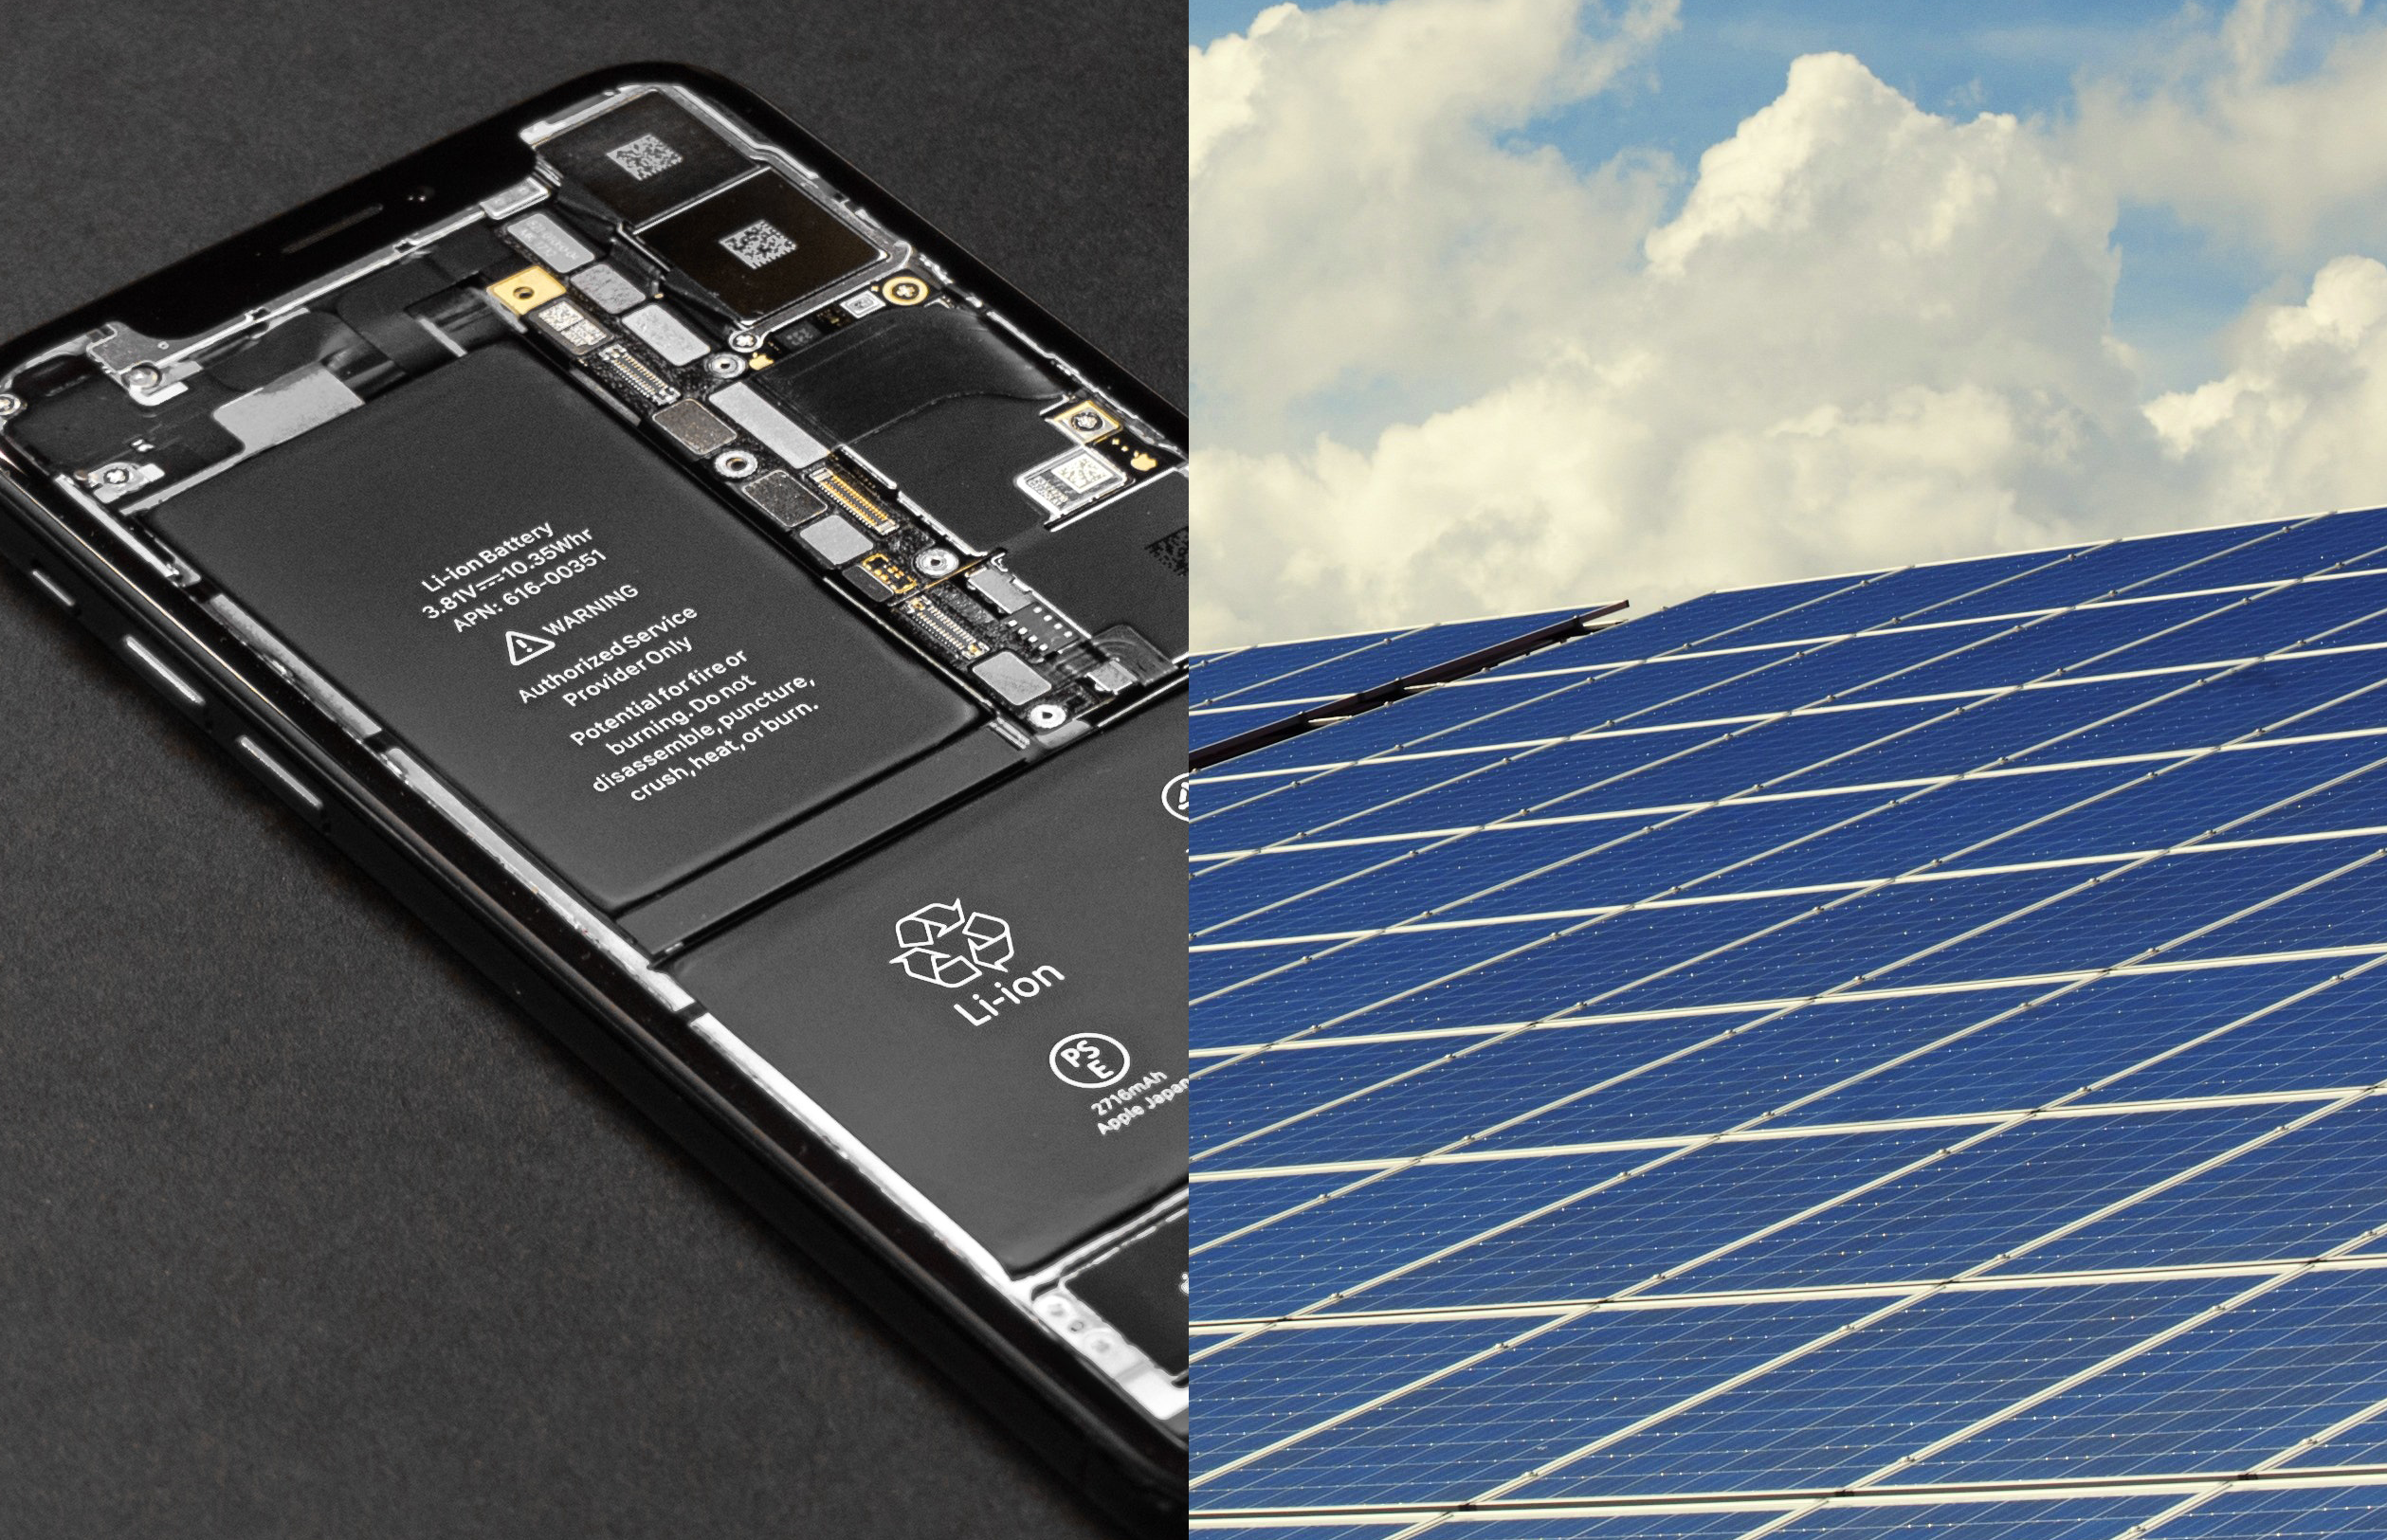 Split image of a lithium ion battery in the back of a cell phone and a large solar panel infront of a sky with drifting clouds